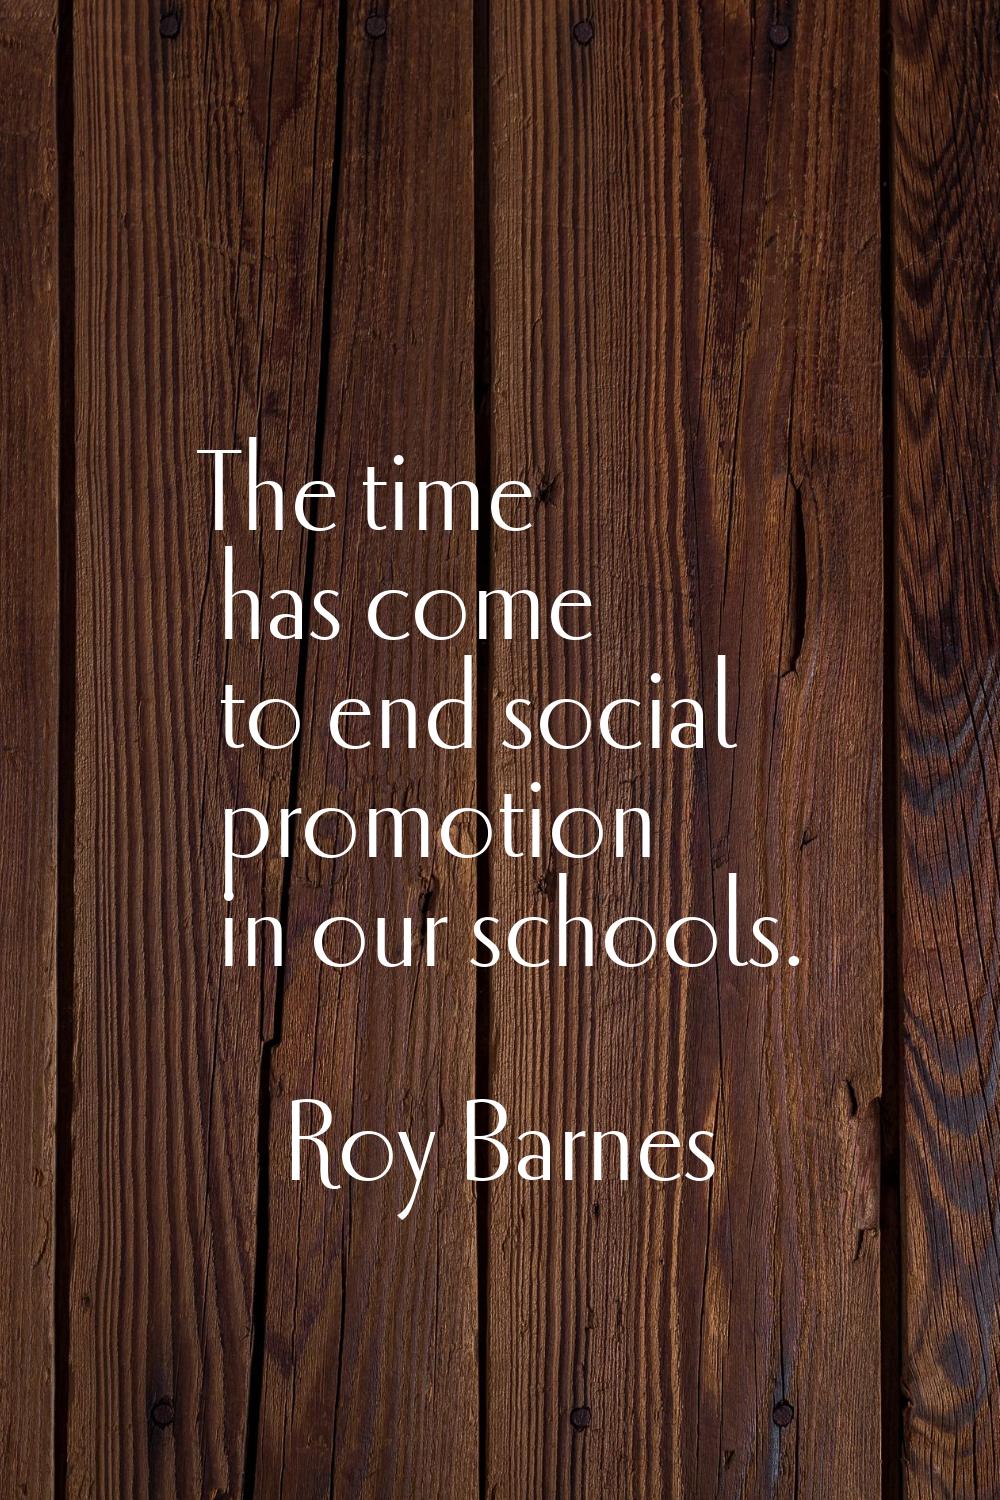 The time has come to end social promotion in our schools.